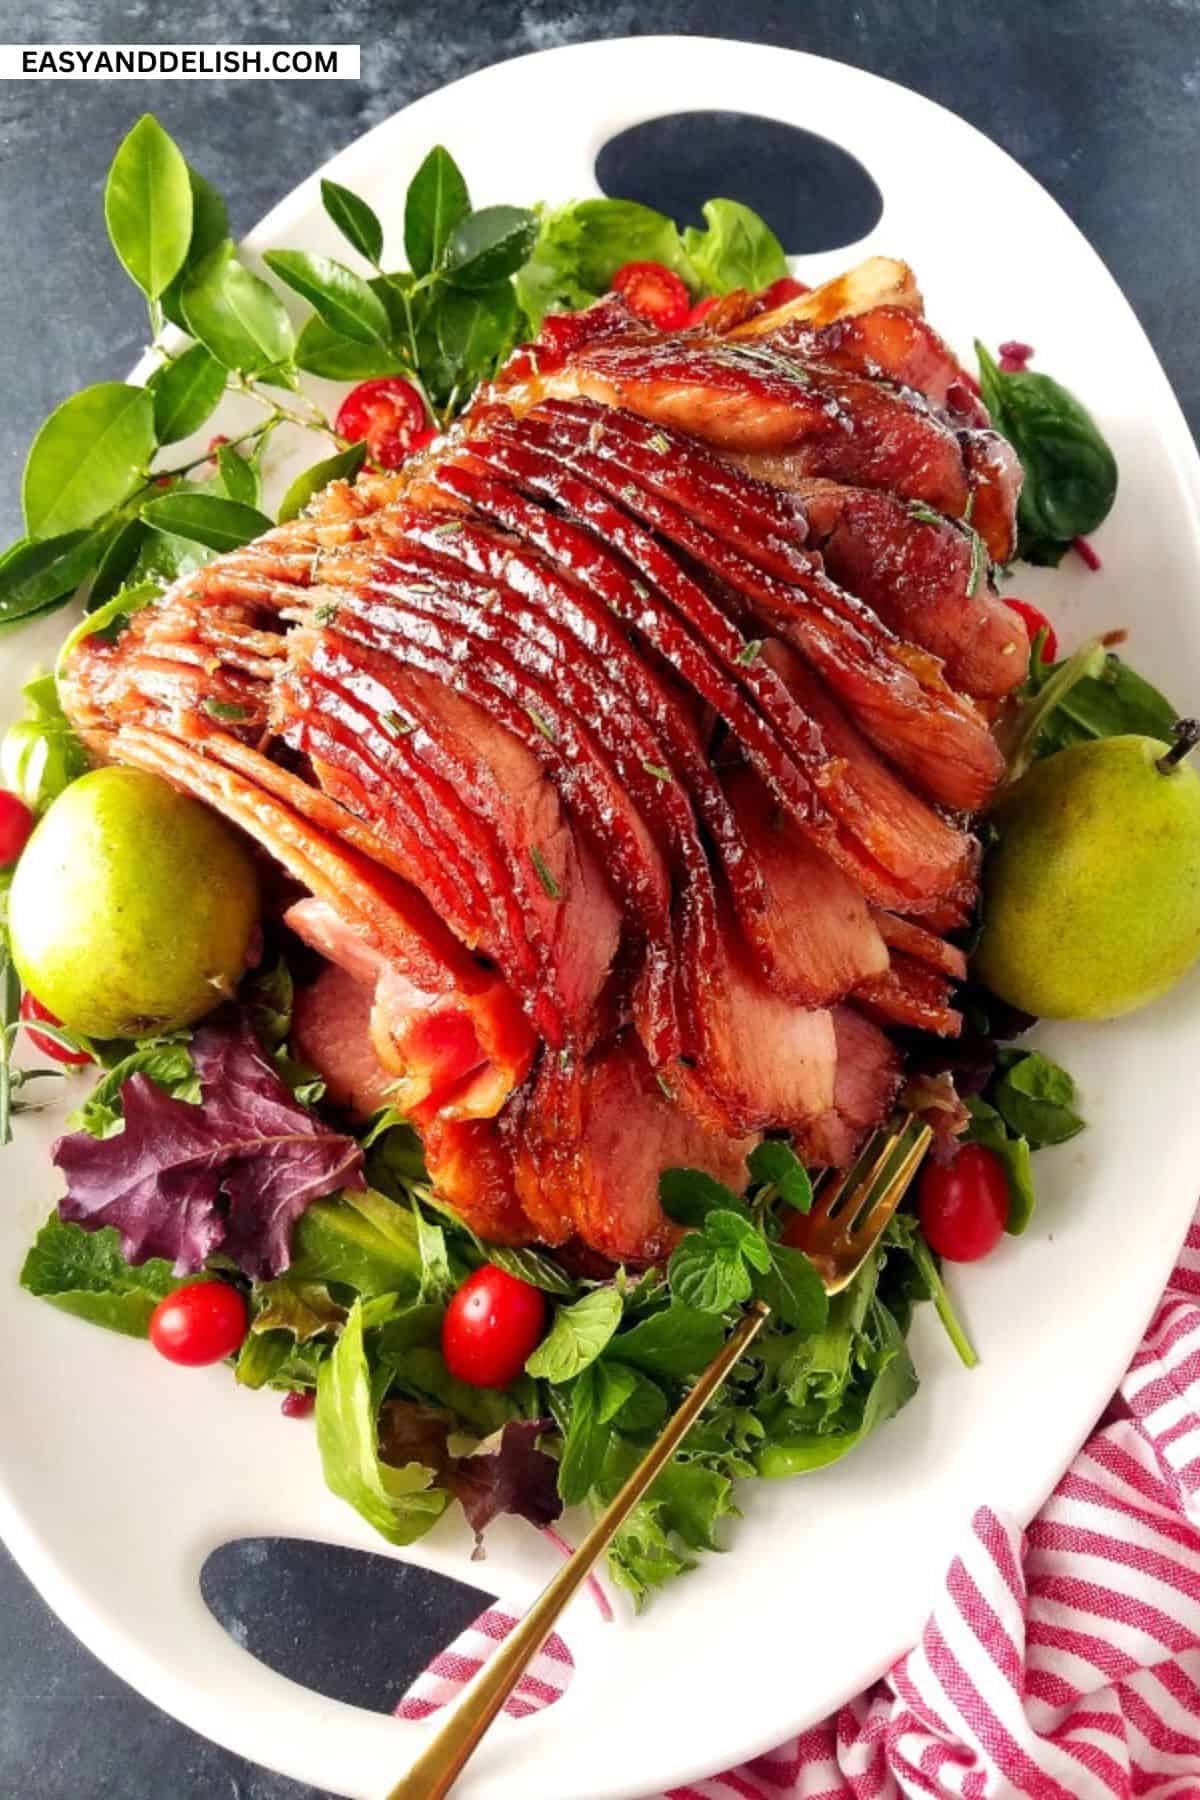 https://www.easyanddelish.com/wp-content/uploads/2019/12/honey-glazed-ham-in-a-platter-with-pears-and-mixed-green-leaves.jpg